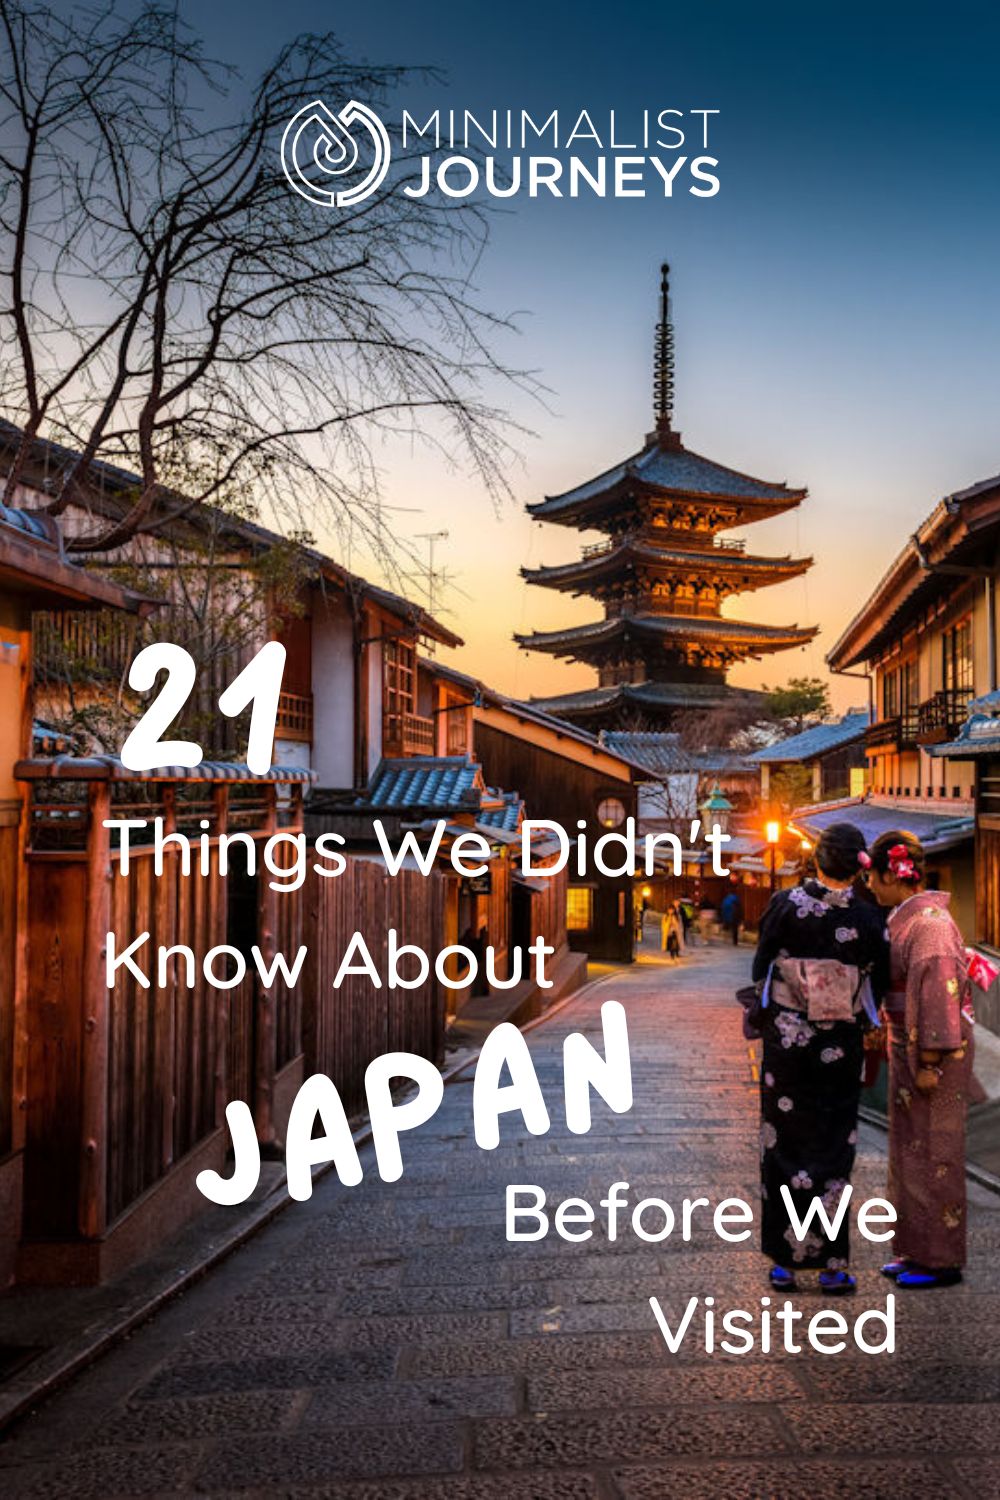 21 surprising things about Japan - Know before you go